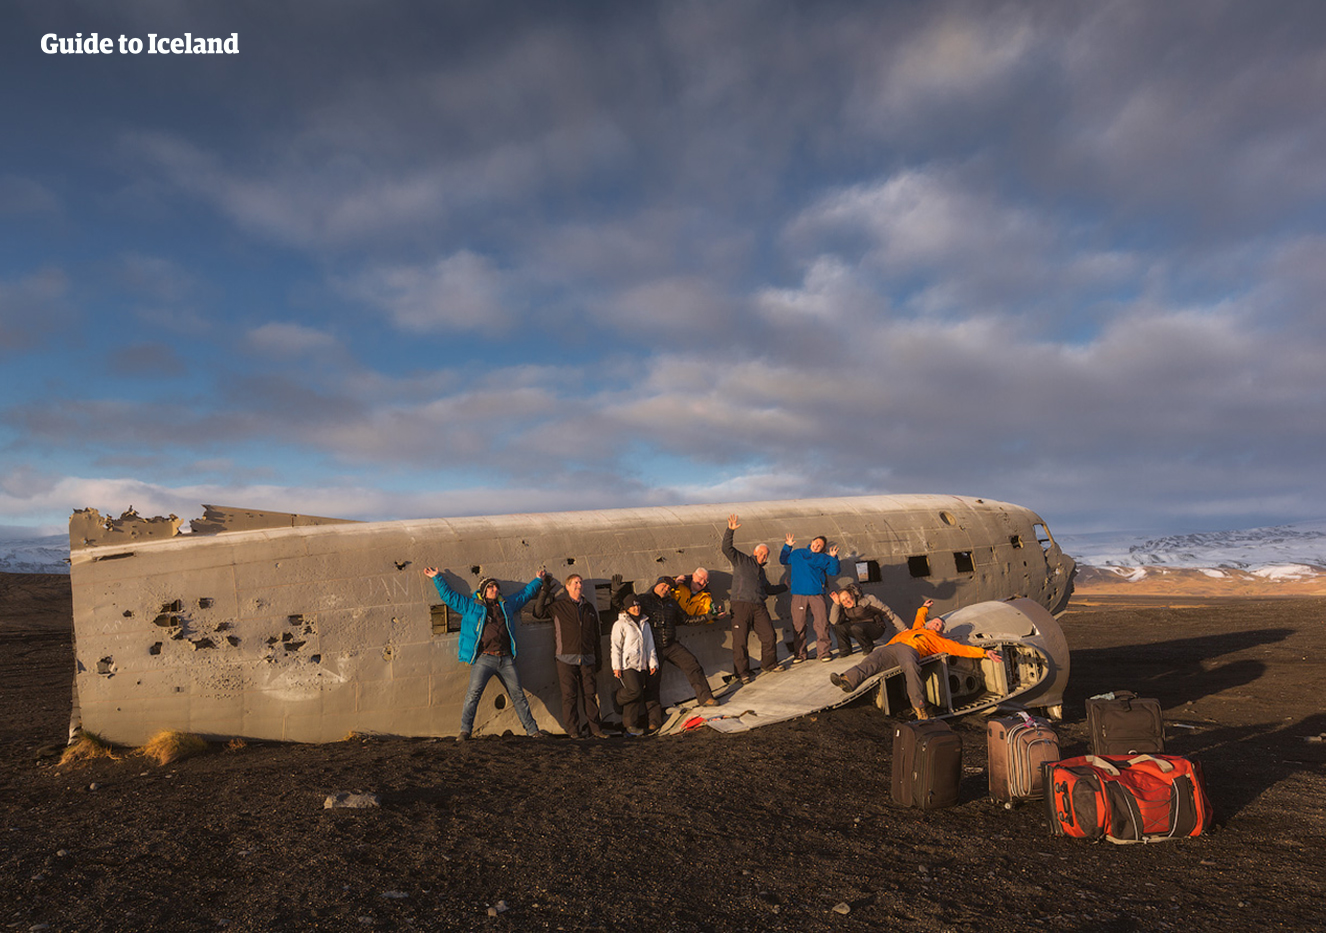 The DC-3 Plane Wreckage can be found on the South Coast of Iceland.